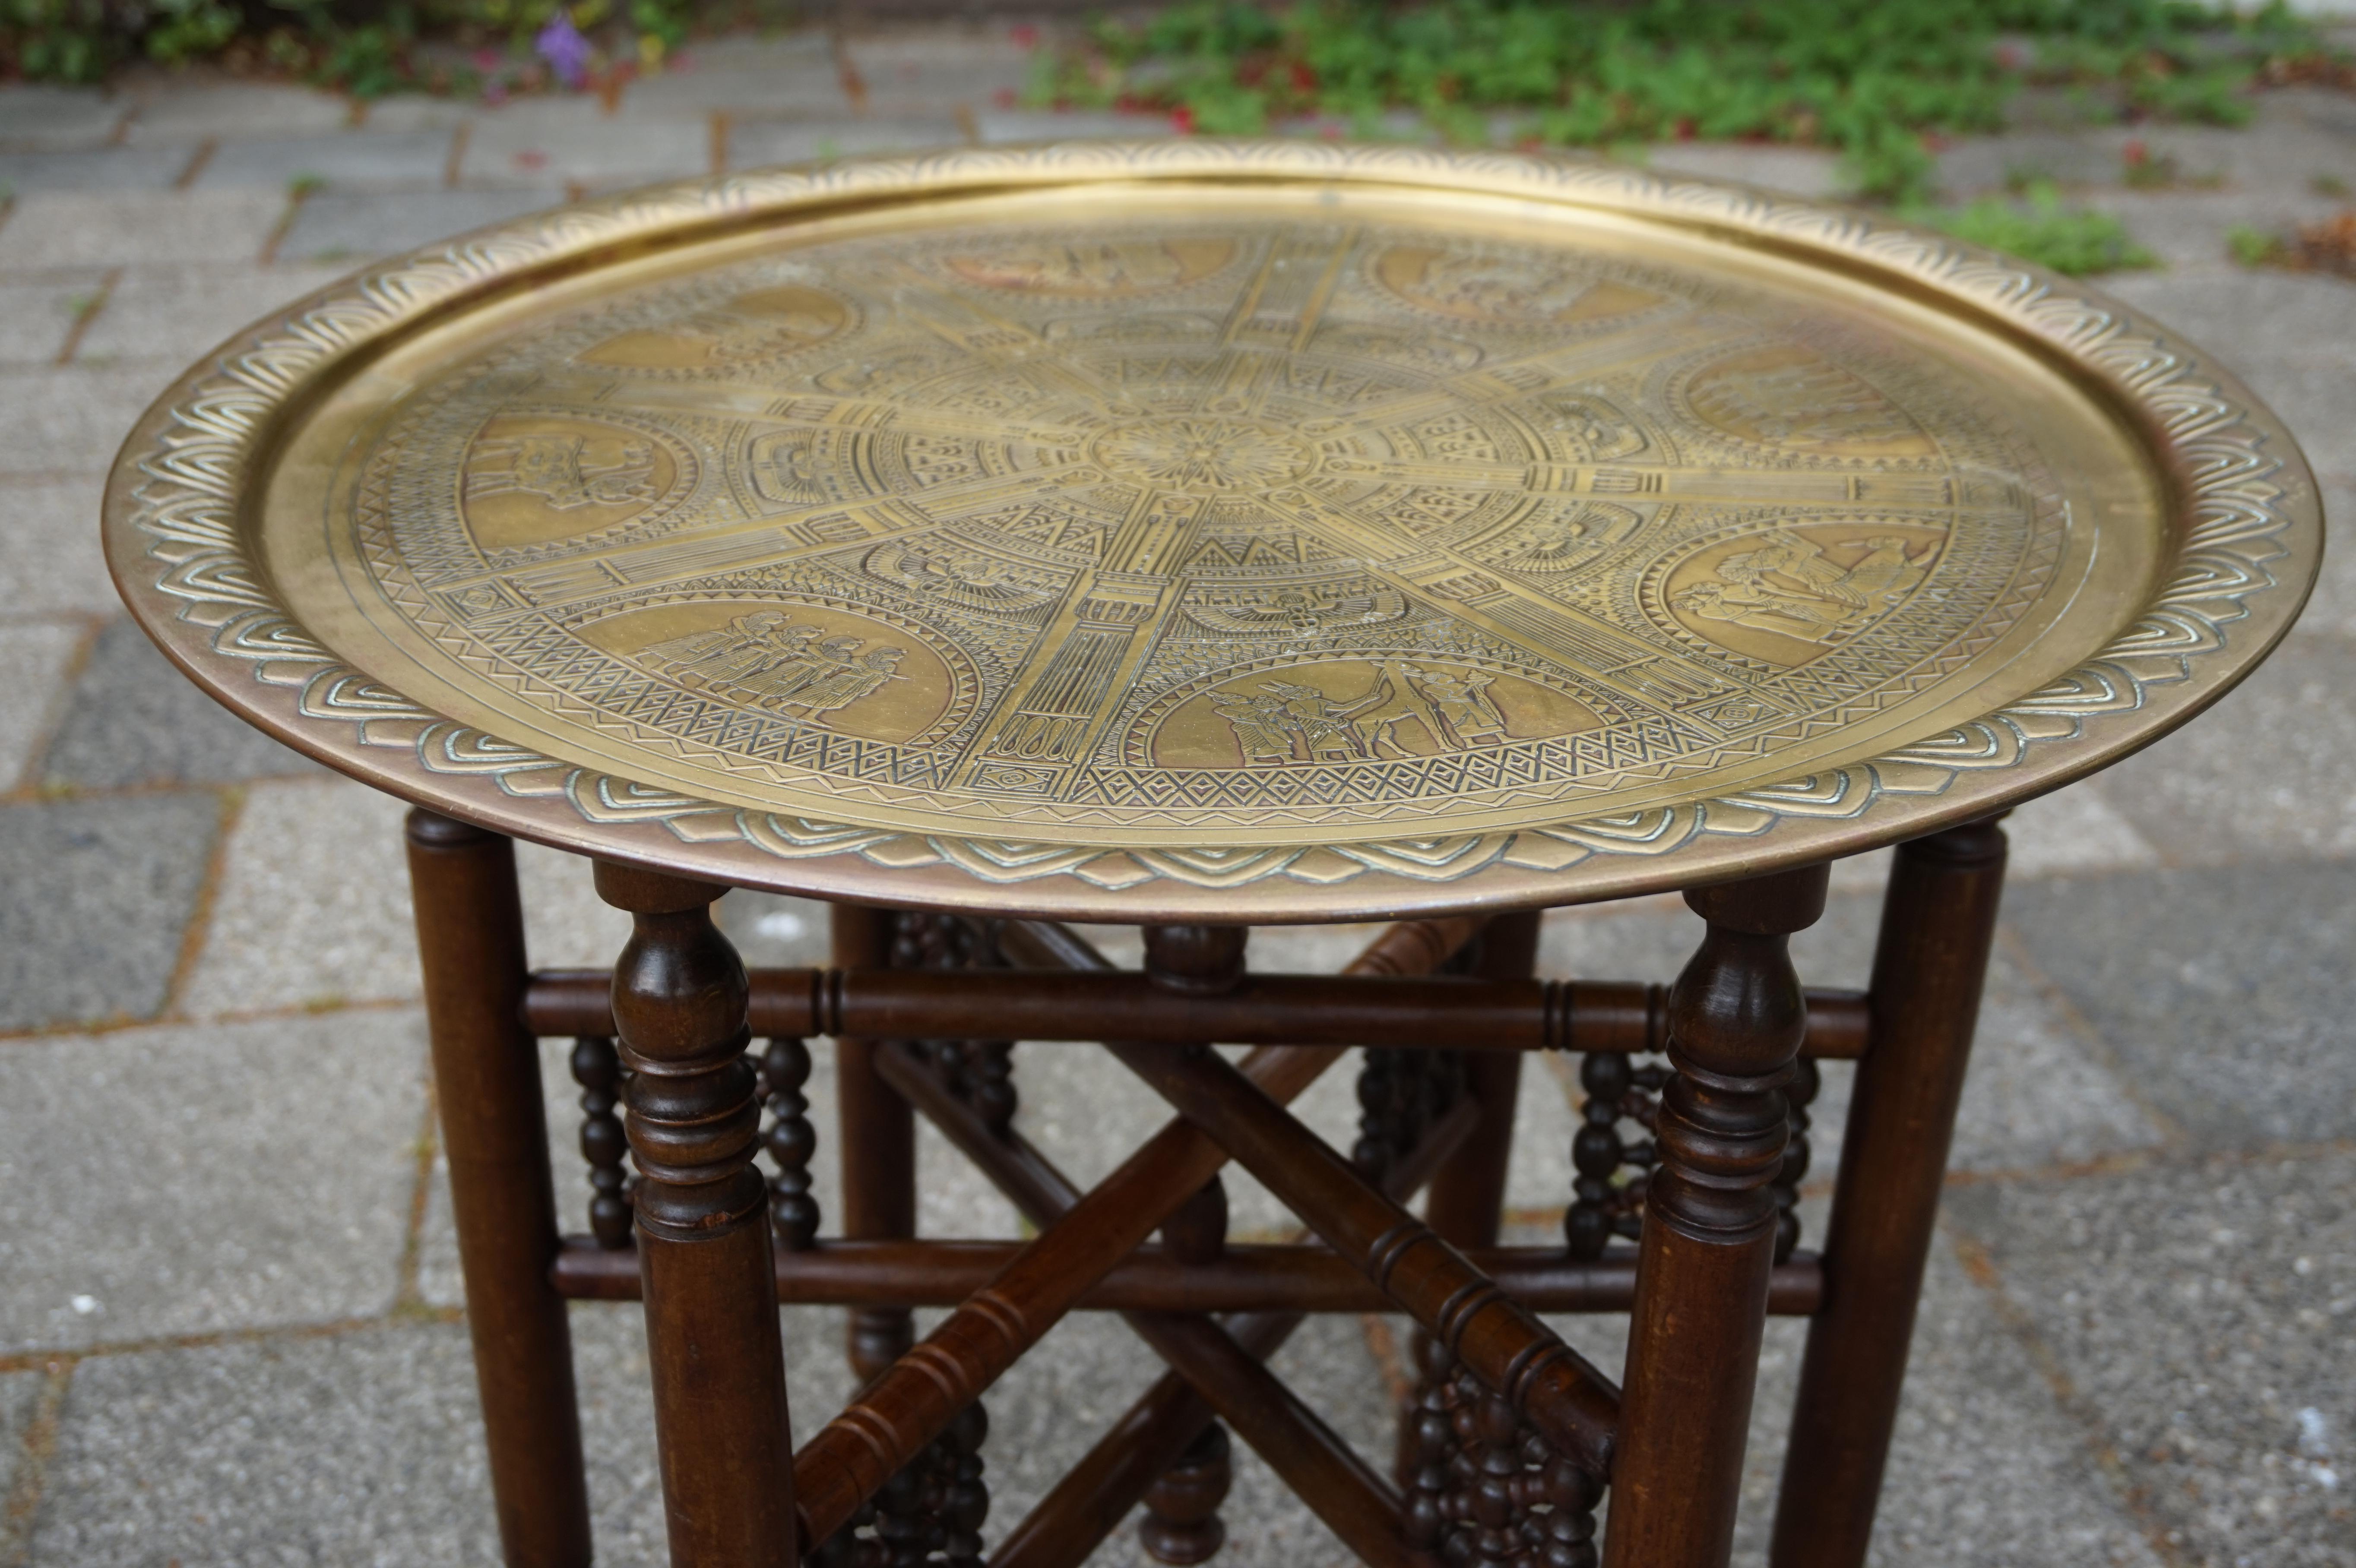 Stylish and meaningful early 20th century Egyptian tray table.

If you are decorating your home, a room or a business with an Egyptian theme then this foldable tray table could be perfect. This handcrafted table from the 1920s mixes the best of two